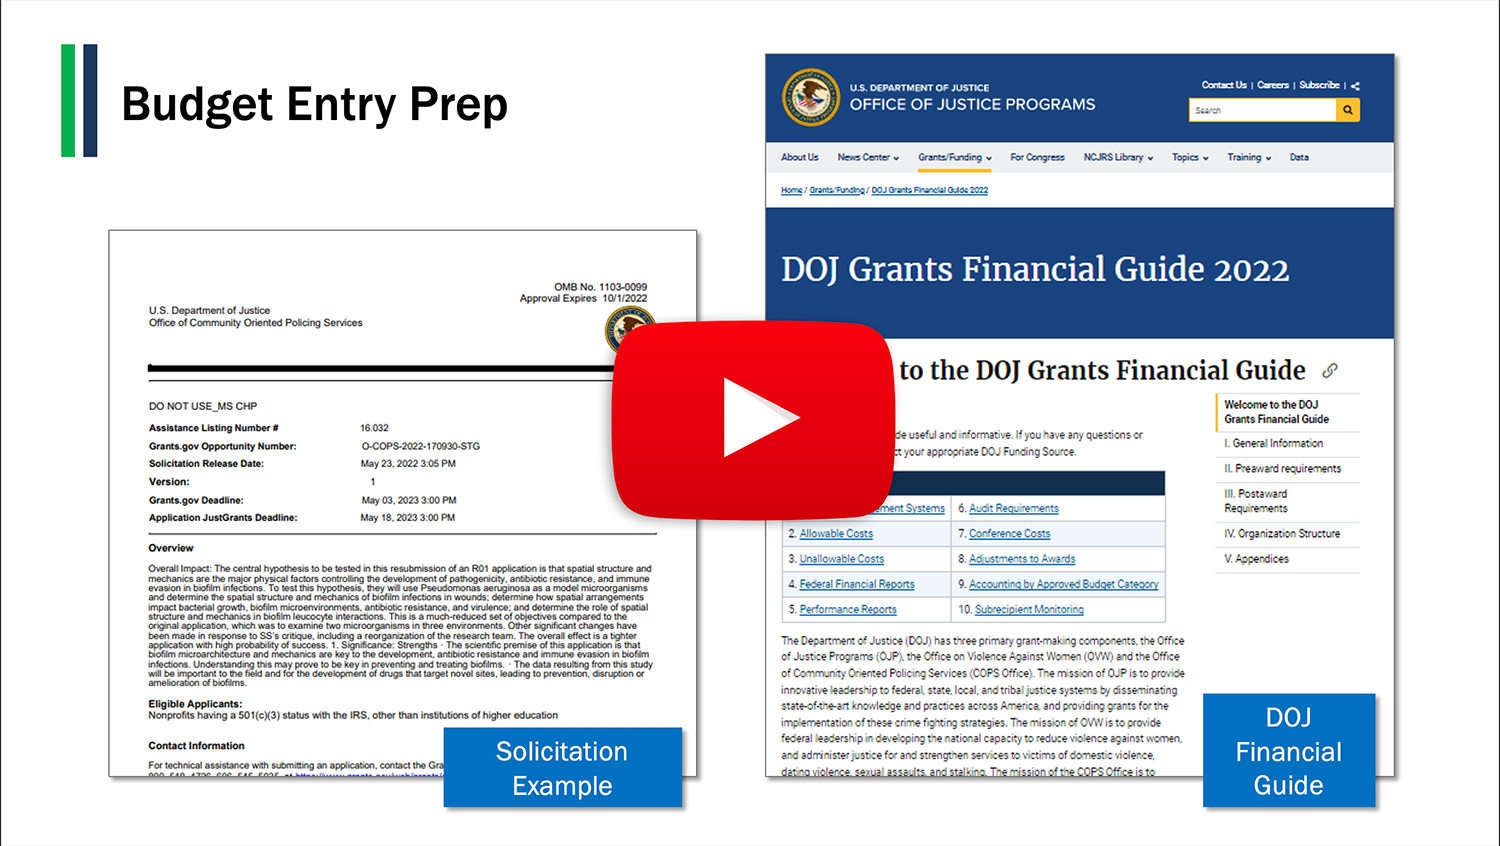 Screenshot from Budget Entry video showing an solicitation example and the DOJ Financial Guide